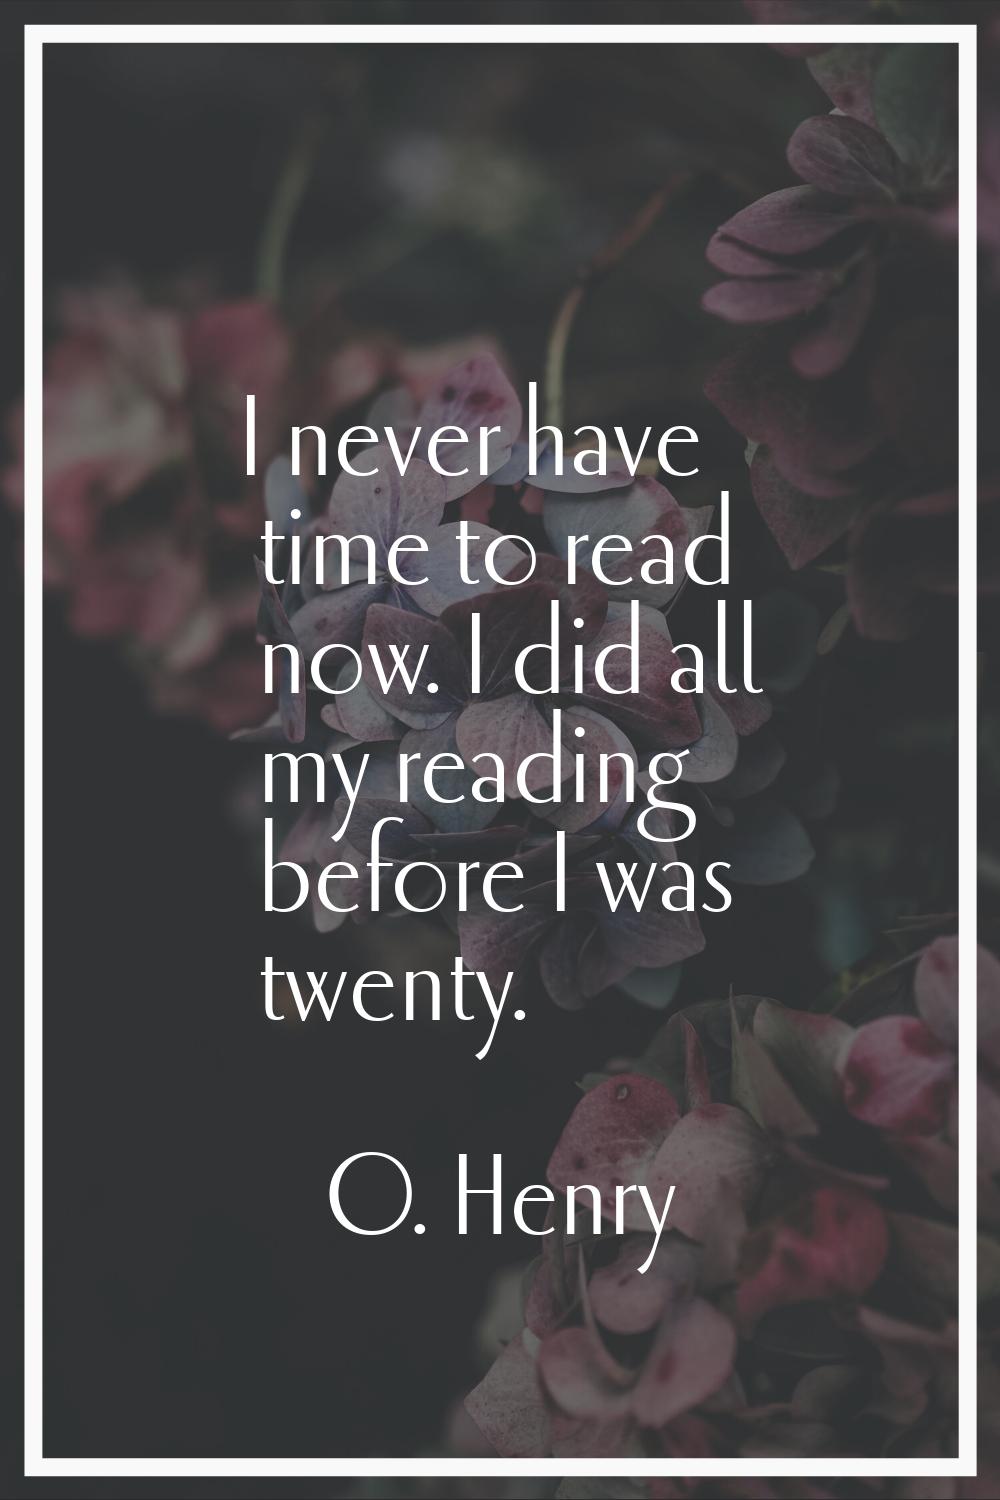 I never have time to read now. I did all my reading before I was twenty.